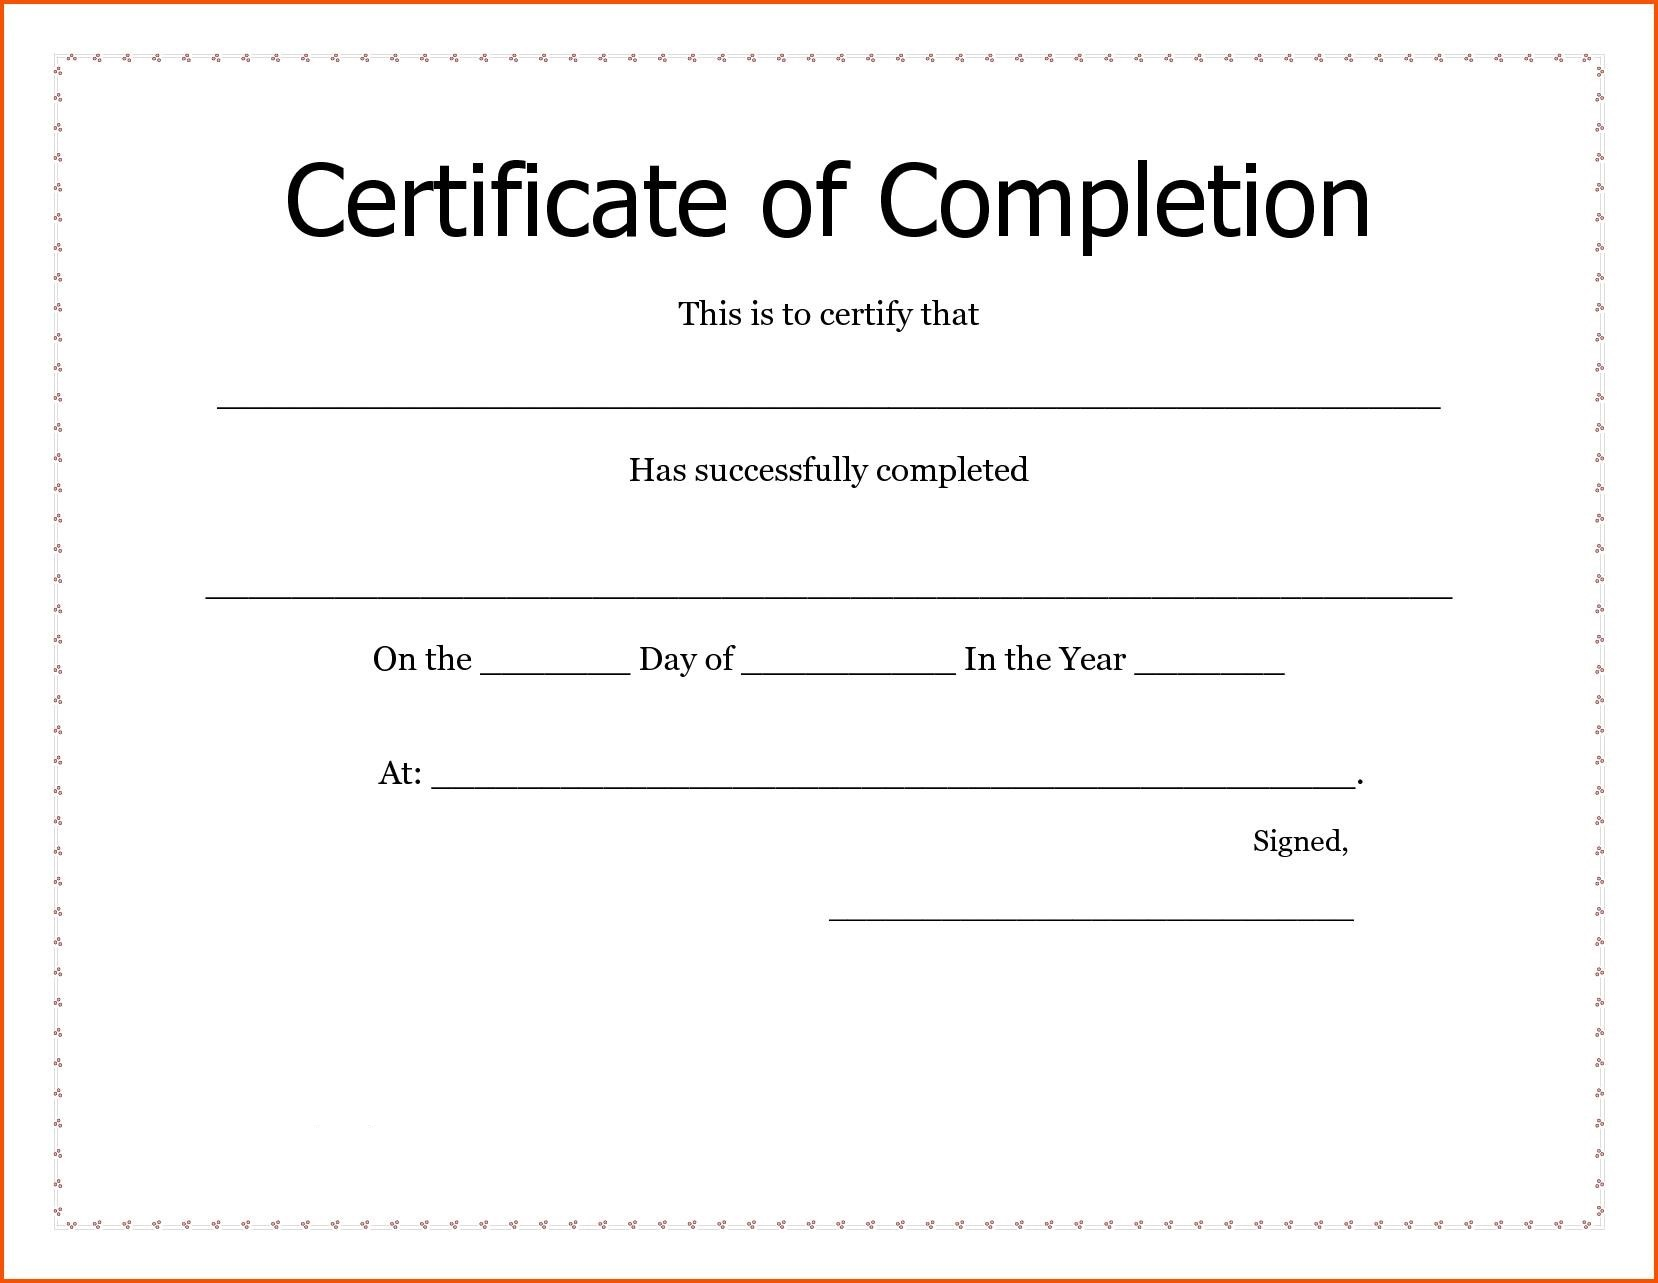 Certificates. New Certificate Of Completion Template Word Intended For Certificate Of Completion Template Word